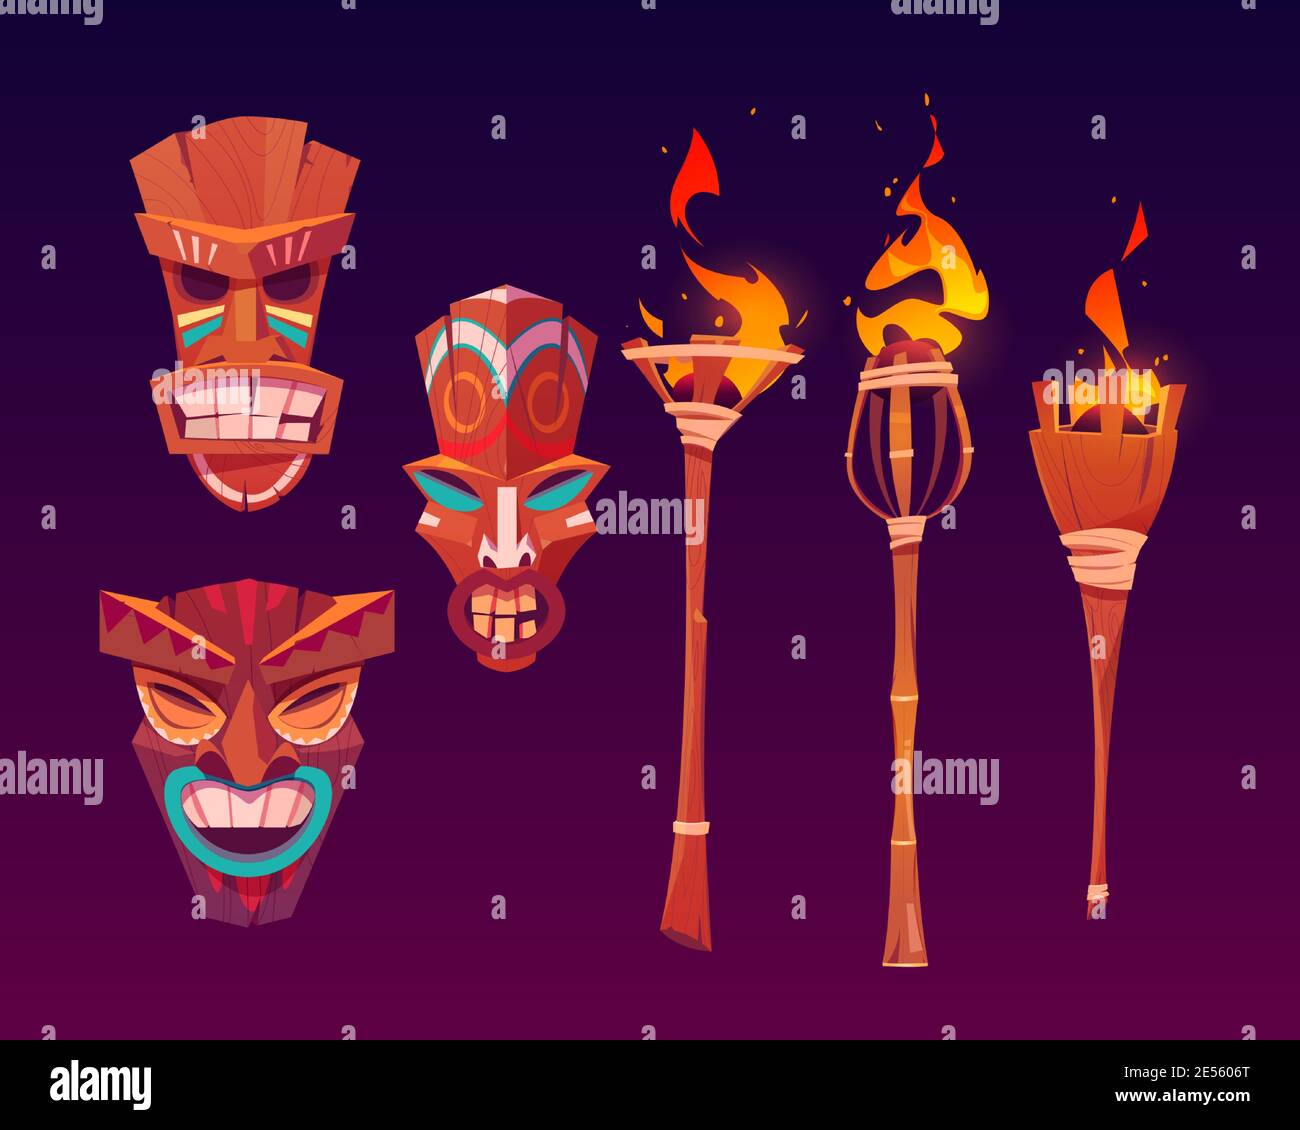 Tiki masks and burning torches, tribal wooden totems, hawaiian or polynesian attributes, scary faces with toothy mouth decorated with painting isolated on dark background. Cartoon vector icons set Stock Vector